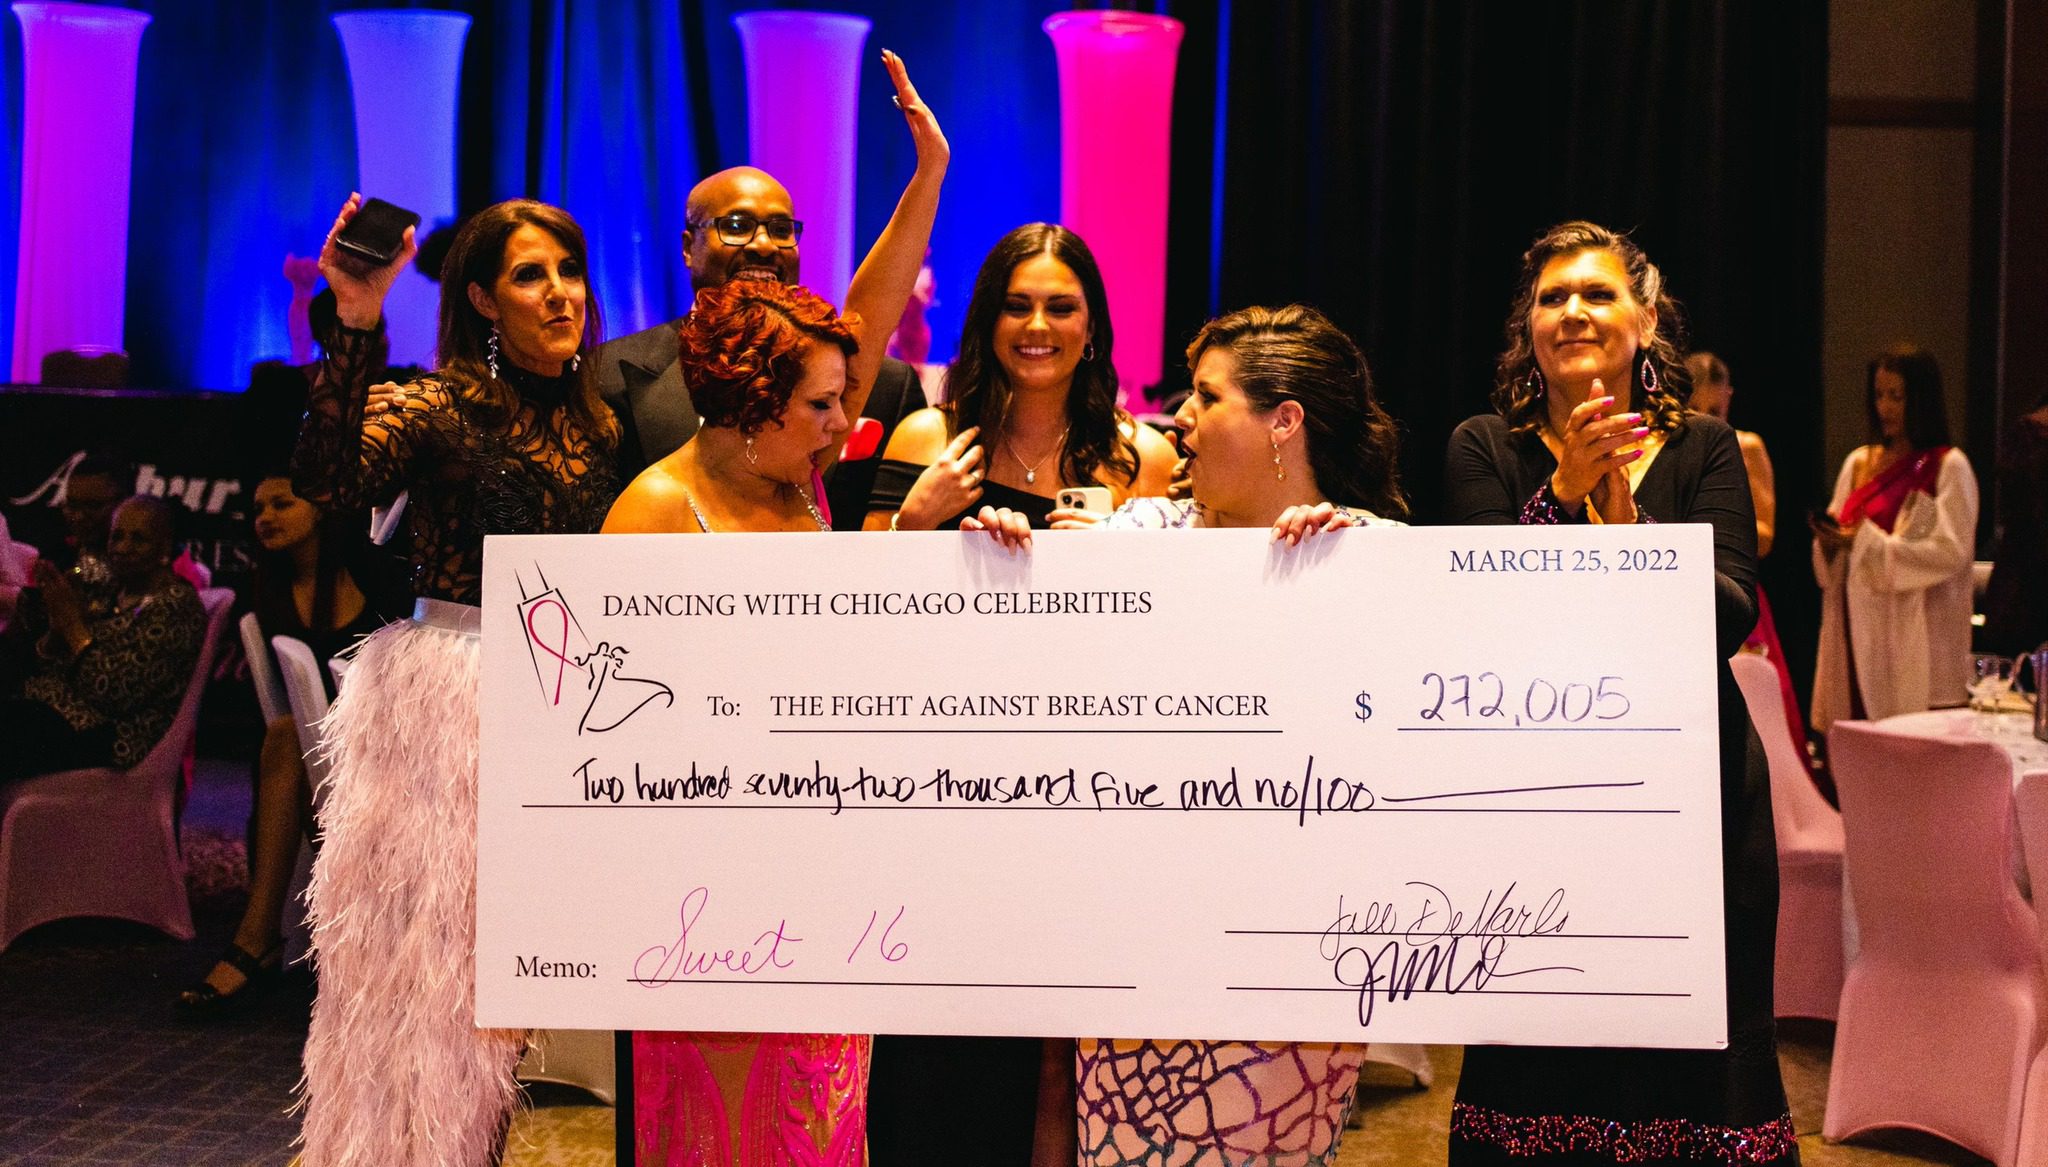 Dancing With Chicago Celebrities - The Fight Against Breast Cancer